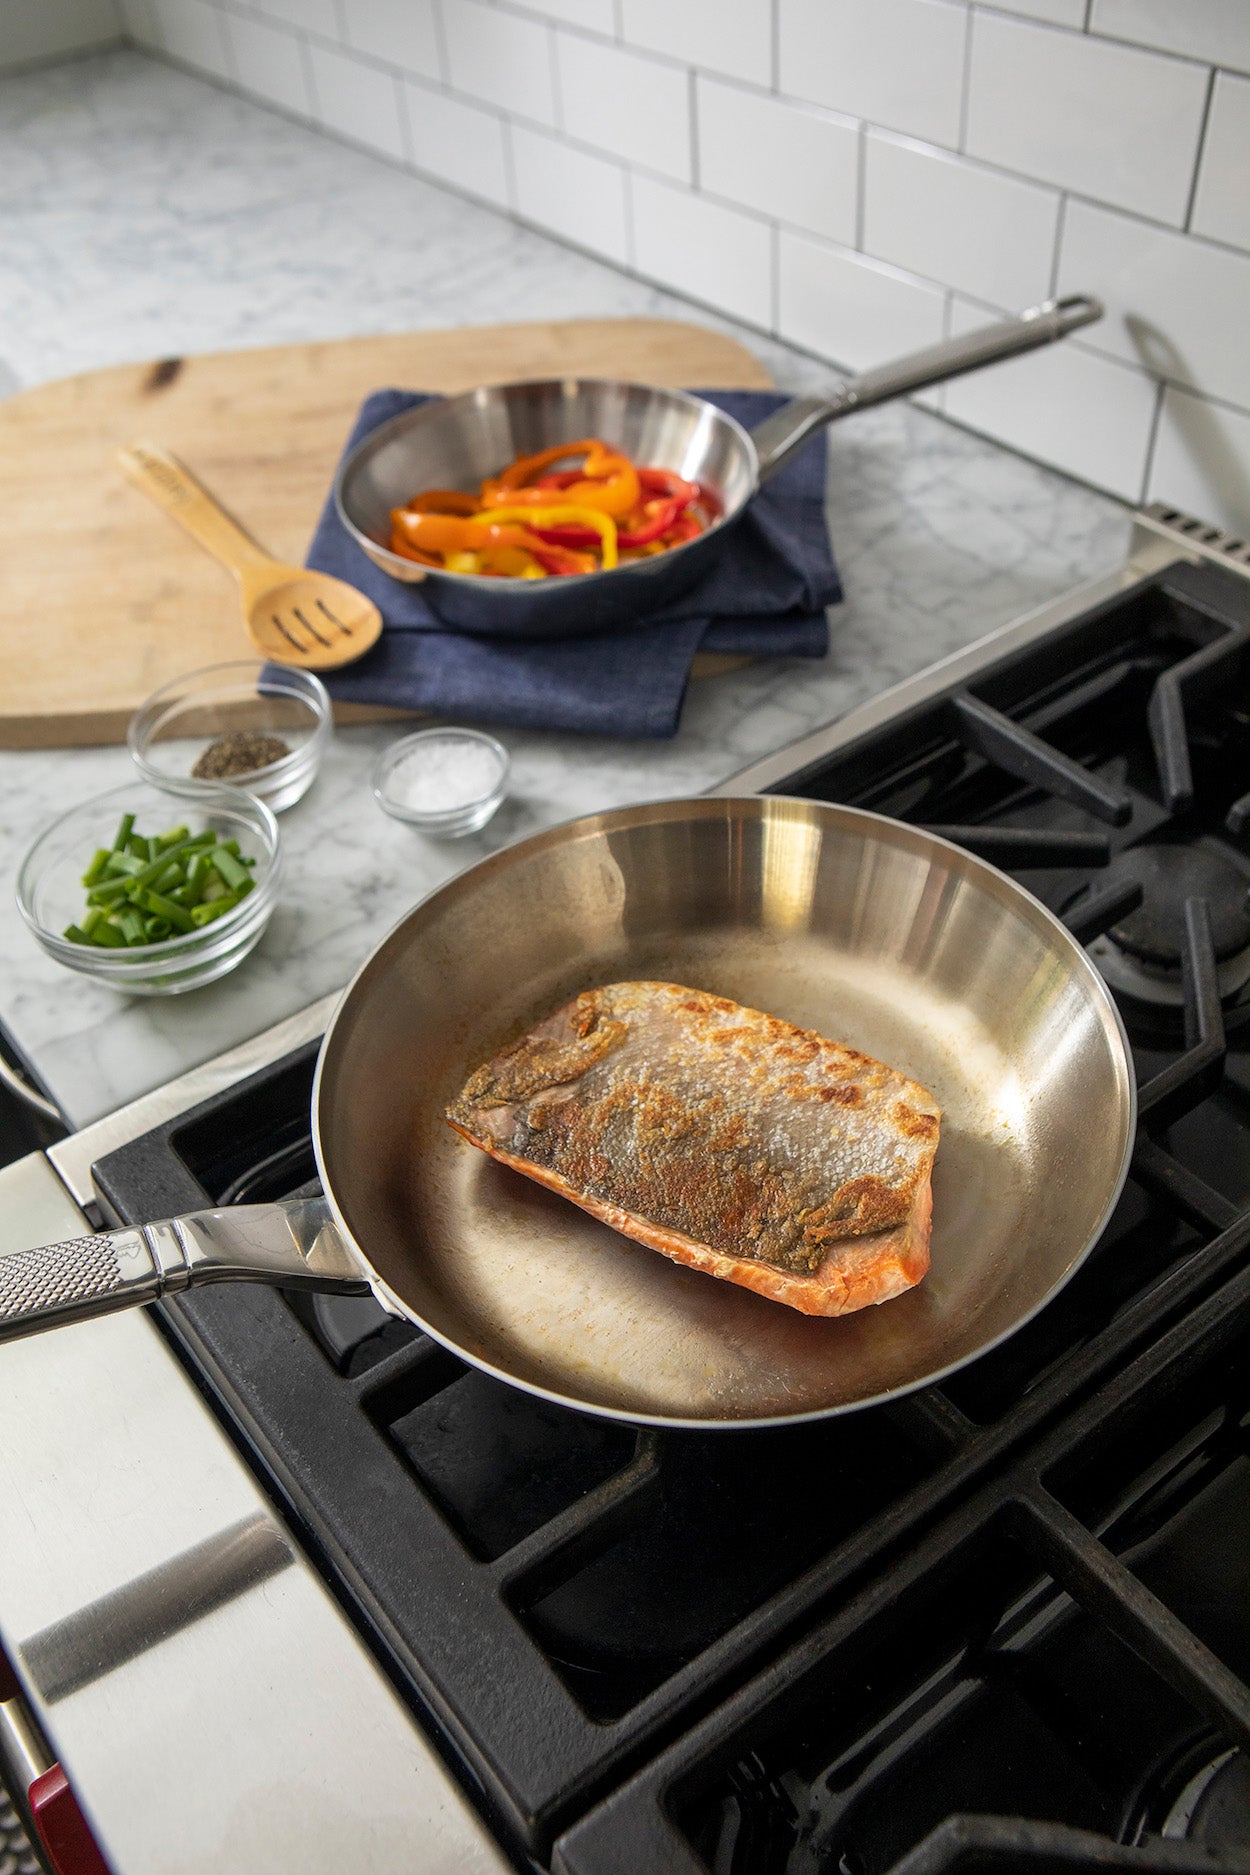 Tri-ply Stainless Steel 12-Inch Everyday Pan with Lid – Saveur Selects